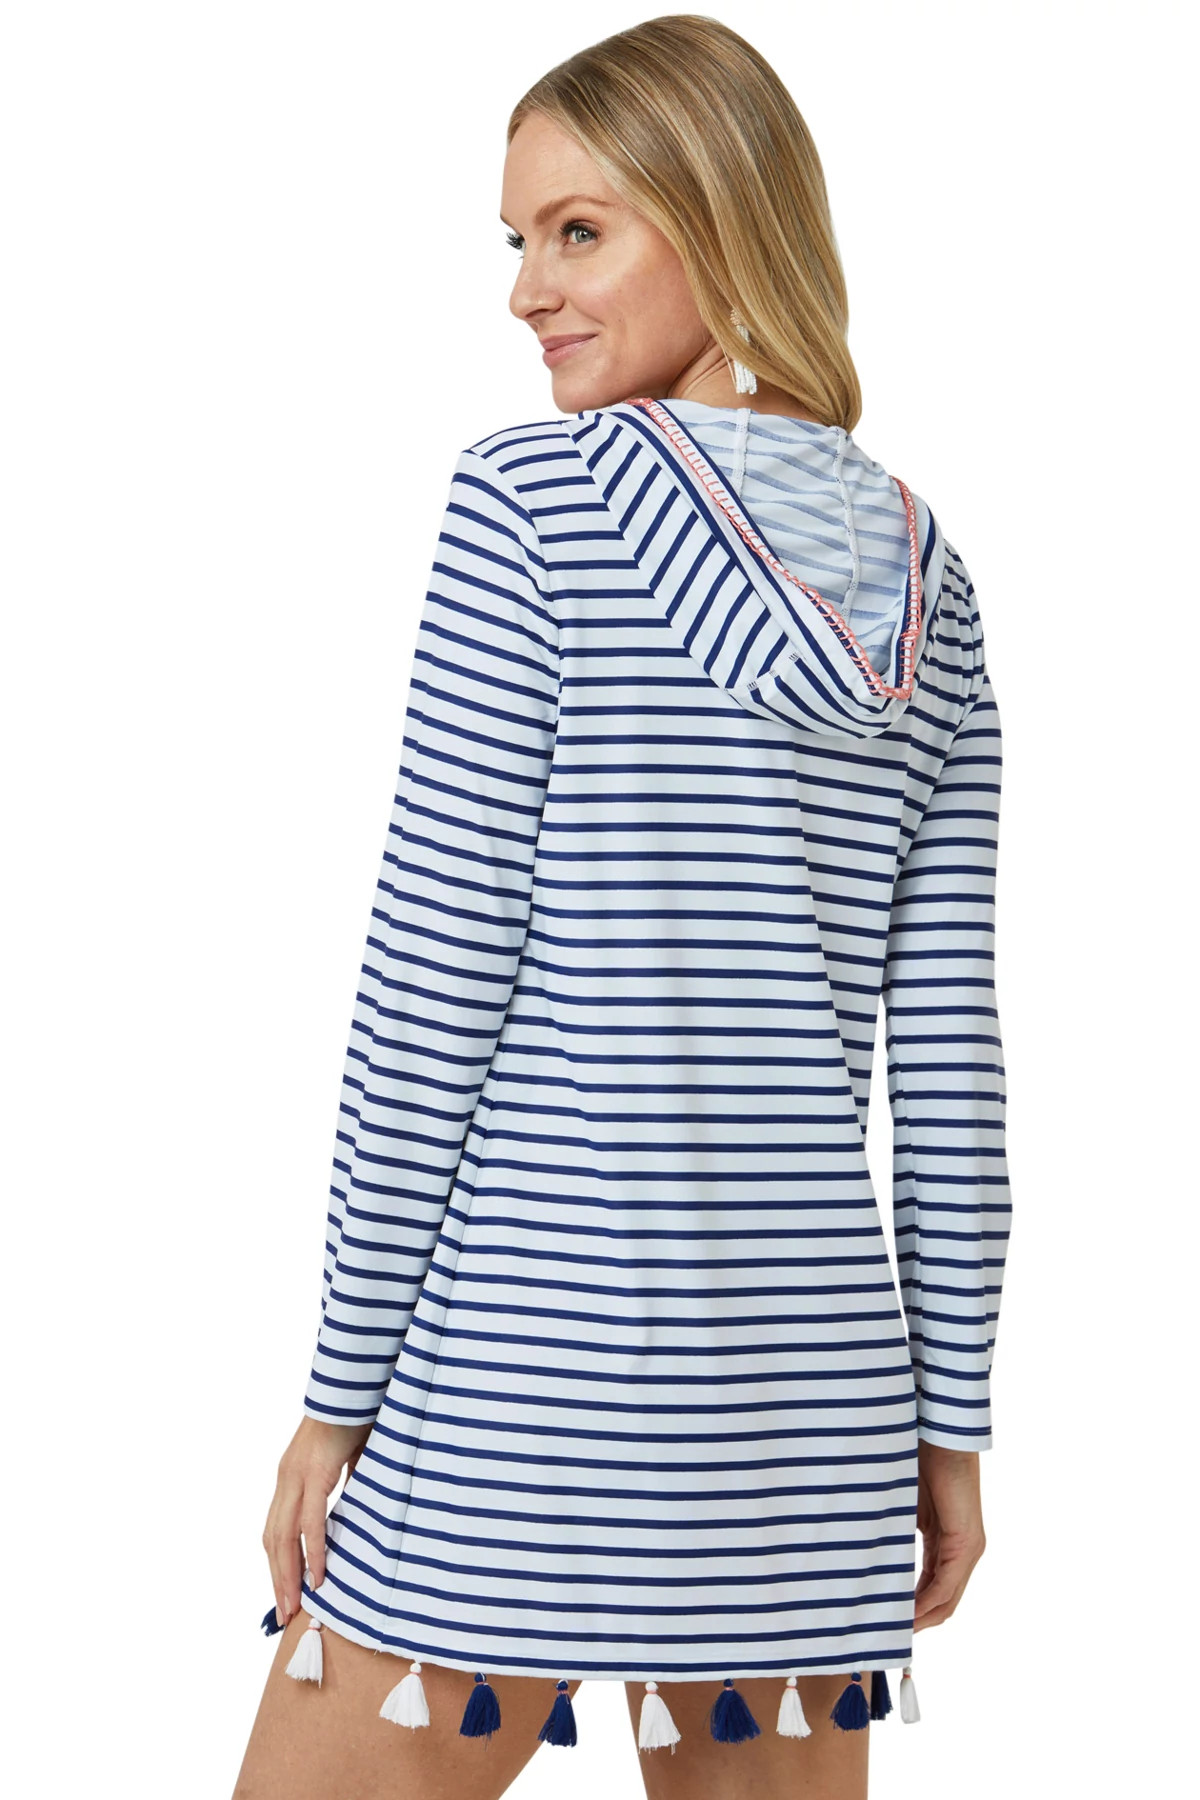 NAVY STRIPE Coverluxe Hooded Cover Up image number 2